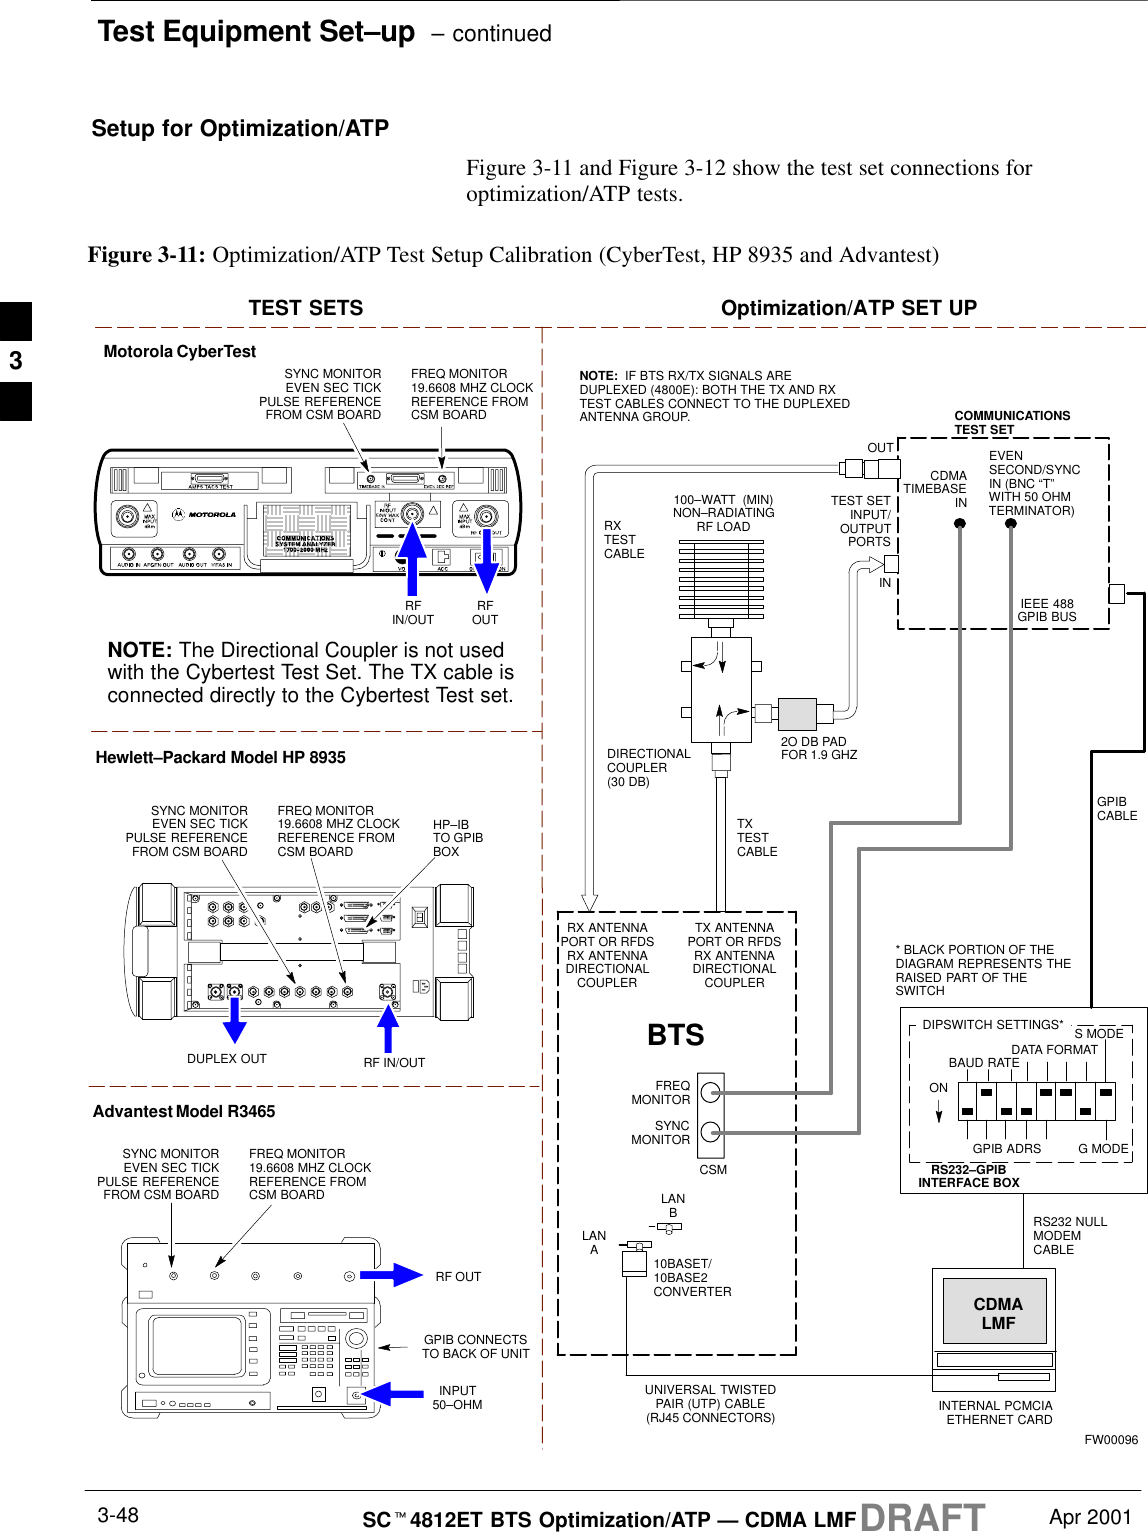 Test Equipment Set–up  – continuedDRAFTSCt4812ET BTS Optimization/ATP — CDMA LMF Apr 20013-48Setup for Optimization/ATPFigure 3-11 and Figure 3-12 show the test set connections foroptimization/ATP tests.Motorola CyberTestHewlett–Packard Model HP 8935DUPLEX OUTTEST SETS Optimization/ATP SET UPRFIN/OUTSYNC MONITOREVEN SEC TICKPULSE REFERENCEFROM CSM BOARDFREQ MONITOR19.6608 MHZ CLOCKREFERENCE FROMCSM BOARDRF IN/OUTHP–IBTO GPIBBOXAdvantest Model R3465INPUT50–OHMGPIB CONNECTSTO BACK OF UNITNOTE: The Directional Coupler is not usedwith the Cybertest Test Set. The TX cable isconnected directly to the Cybertest Test set.RF OUTRX ANTENNAPORT OR RFDSRX ANTENNADIRECTIONALCOUPLERTX ANTENNAPORT OR RFDSRX ANTENNADIRECTIONALCOUPLERRS232–GPIBINTERFACE BOXINTERNAL PCMCIAETHERNET CARDGPIBCABLEUNIVERSAL TWISTEDPAIR (UTP) CABLE(RJ45 CONNECTORS)RS232 NULLMODEMCABLES MODEDATA FORMATBAUD RATEGPIB ADRS G MODEONBTSTXTESTCABLECDMALMFDIPSWITCH SETTINGS*10BASET/10BASE2CONVERTERLANBLANARXTESTCABLECOMMUNICATIONSTEST SETIEEE 488GPIB BUSINTEST SETINPUT/OUTPUTPORTSOUTNOTE:  IF BTS RX/TX SIGNALS AREDUPLEXED (4800E): BOTH THE TX AND RXTEST CABLES CONNECT TO THE DUPLEXEDANTENNA GROUP.100–WATT  (MIN)NON–RADIATINGRF LOAD2O DB PADFOR 1.9 GHZDIRECTIONALCOUPLER(30 DB)EVENSECOND/SYNCIN (BNC “T”WITH 50 OHMTERMINATOR)CDMATIMEBASE INFREQMONITORSYNCMONITORCSMFW00096Figure 3-11: Optimization/ATP Test Setup Calibration (CyberTest, HP 8935 and Advantest)SYNC MONITOREVEN SEC TICKPULSE REFERENCEFROM CSM BOARDFREQ MONITOR19.6608 MHZ CLOCKREFERENCE FROMCSM BOARDSYNC MONITOREVEN SEC TICKPULSE REFERENCEFROM CSM BOARDFREQ MONITOR19.6608 MHZ CLOCKREFERENCE FROMCSM BOARDRFOUT* BLACK PORTION OF THEDIAGRAM REPRESENTS THERAISED PART OF THESWITCH3